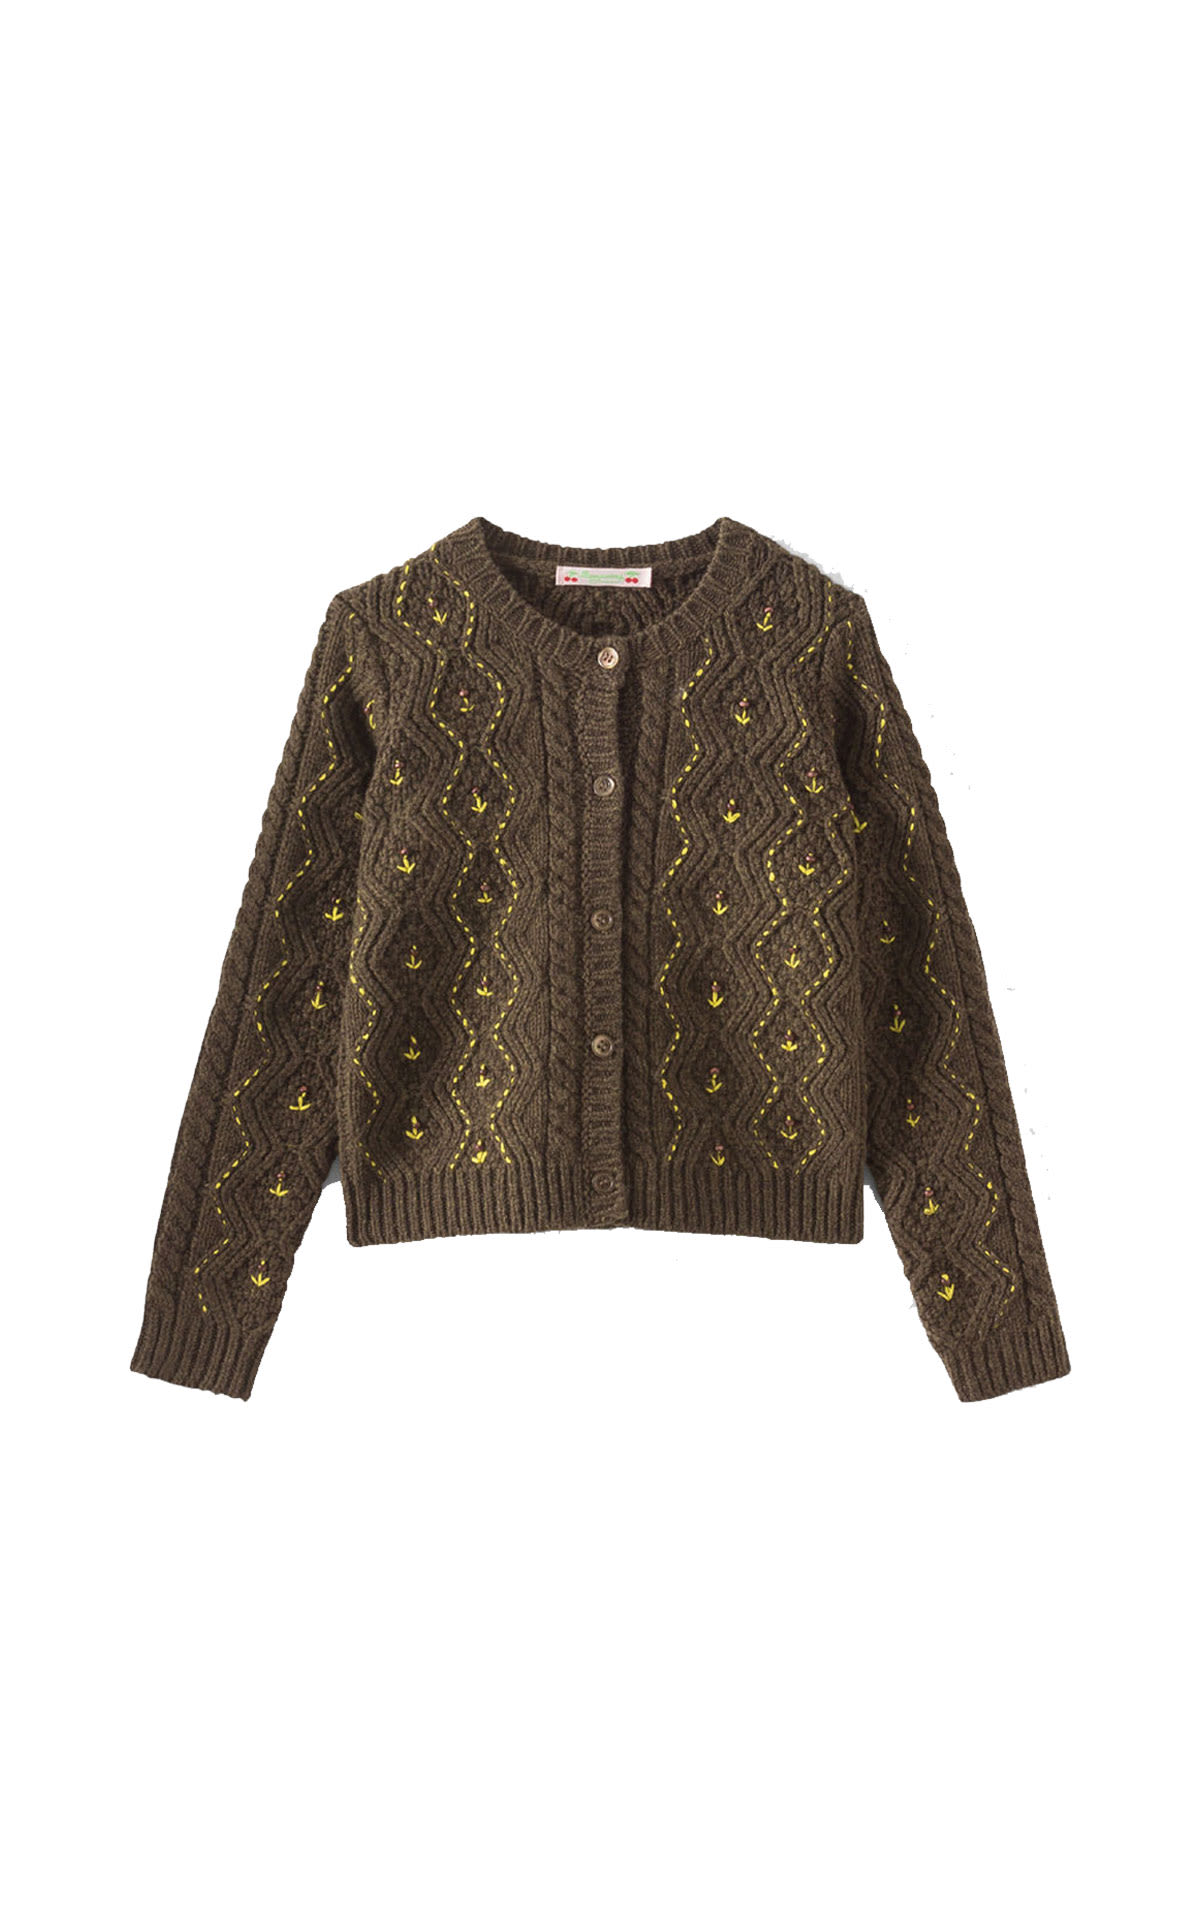 Bonpoint Girl's chunky knit cardigan from Bicester Village